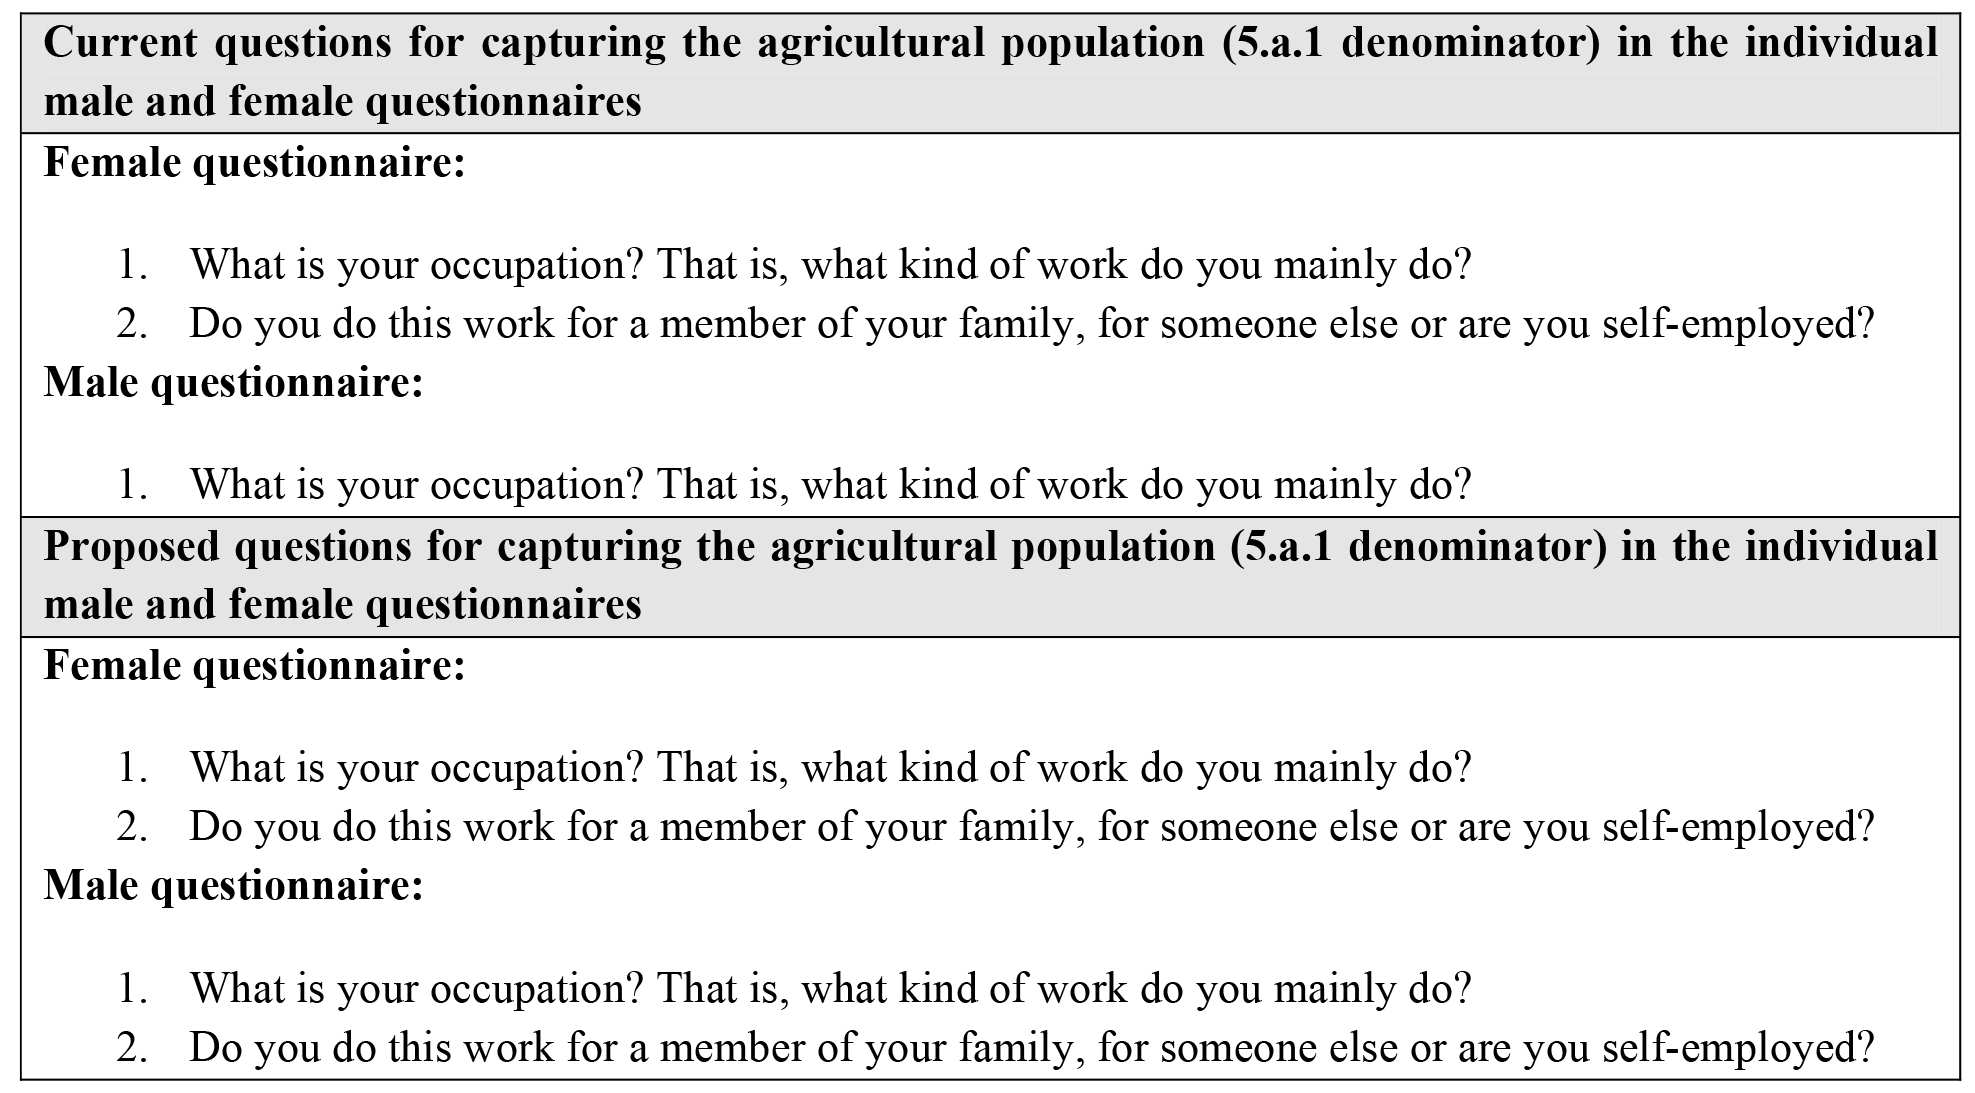 Proposal for improving questions capturing the agricultural population according to 5.a.1 definitions.